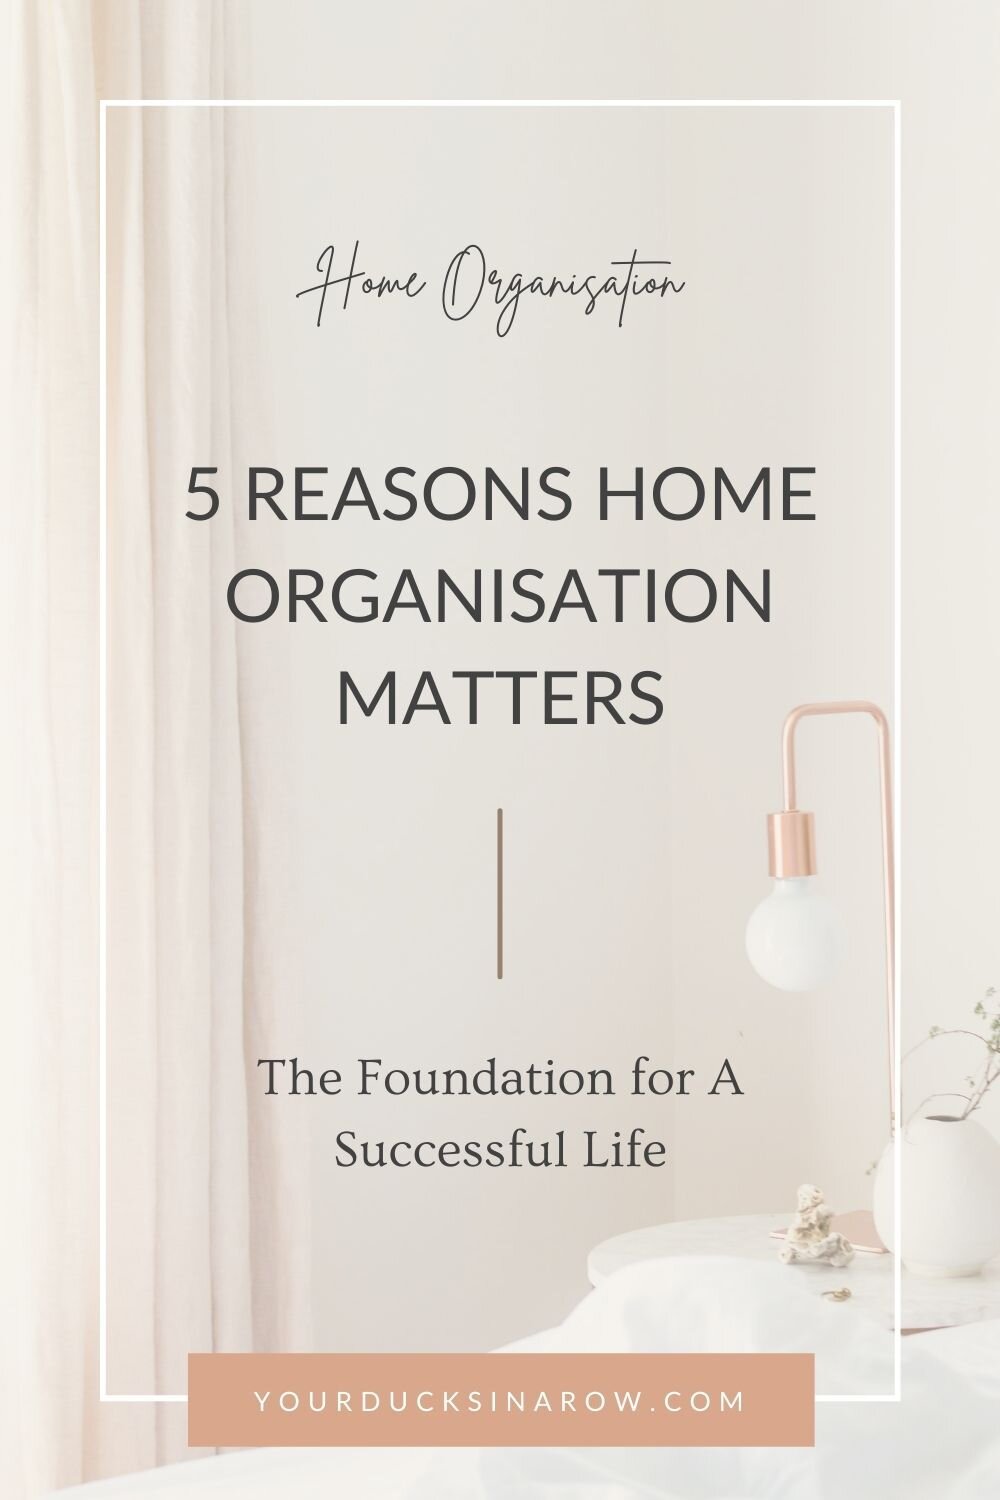 Ducks in a row 5 Reasons Home Organisation Matters - The Foundation for A Successful Life